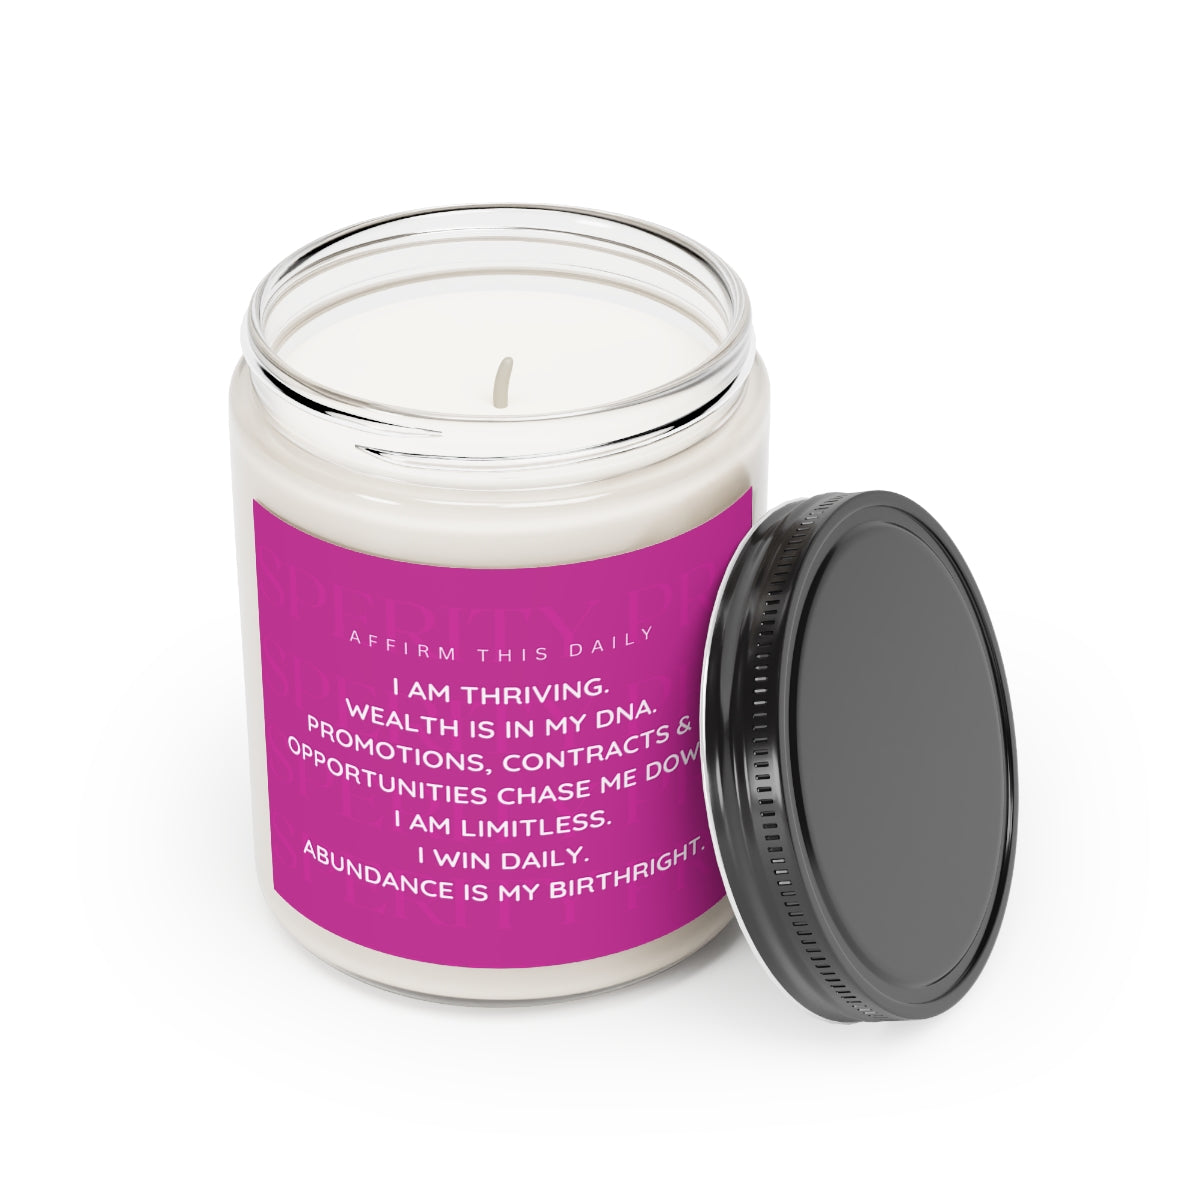 "Prosperity" Affirmation Scented Candle, 9oz